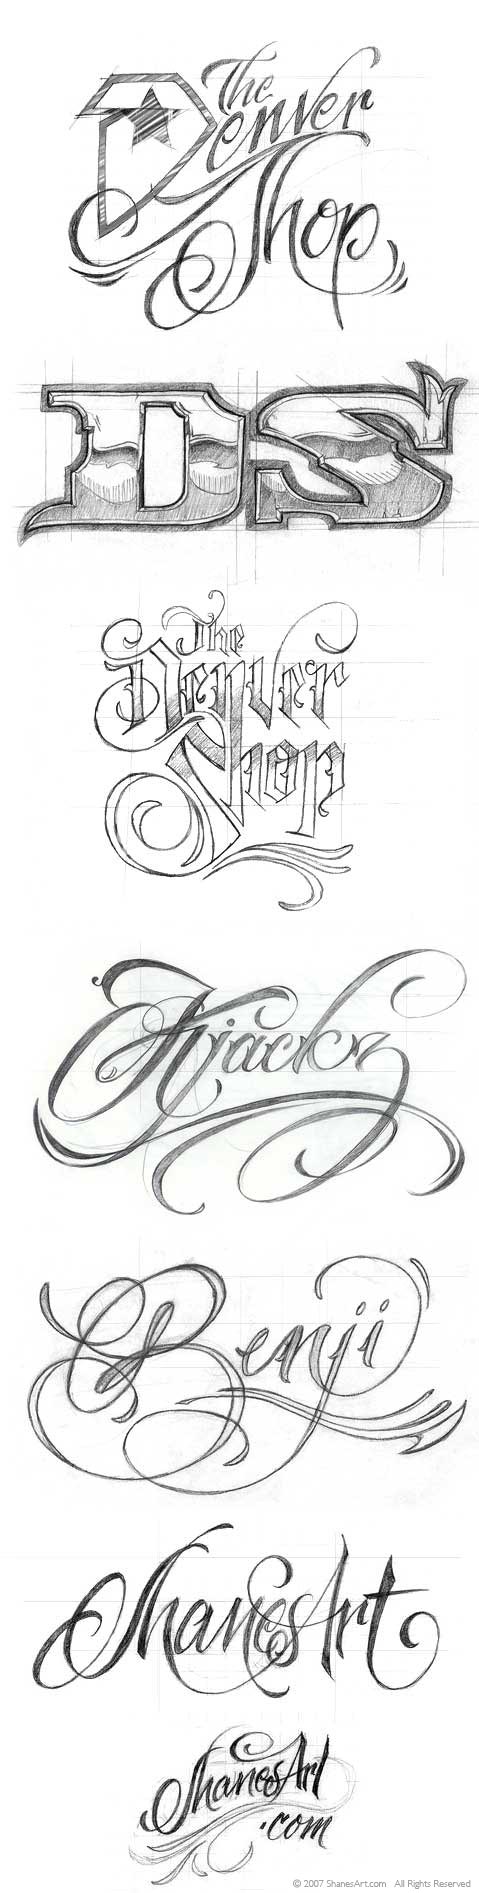 sophisticated feel of biker/tattoo lettering. Very inspirational to me